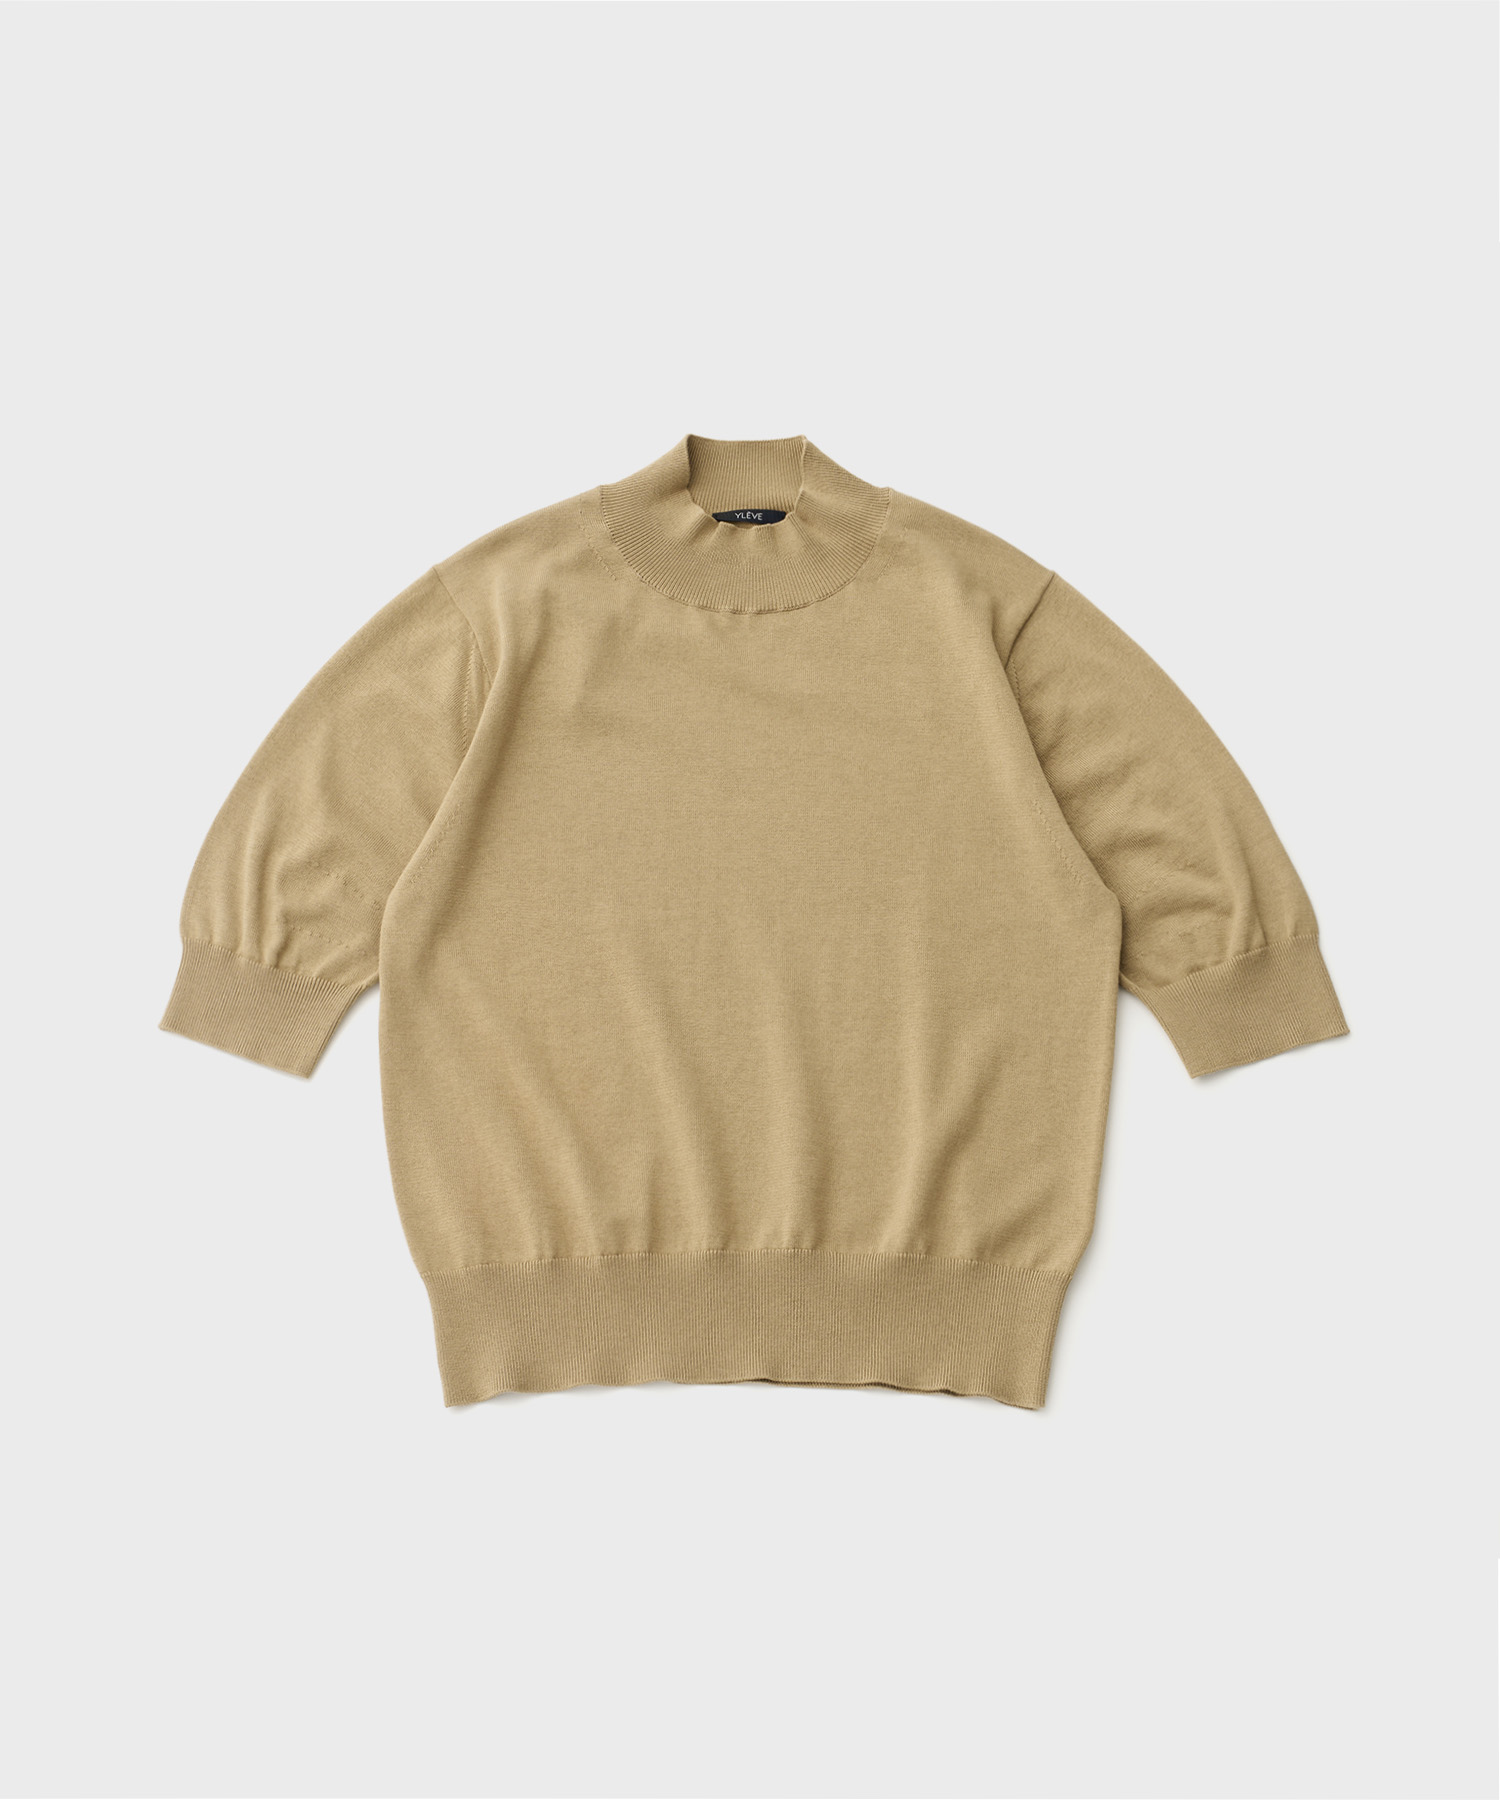 ELS Giza Cotton High Neck SS Sweater (Beige)